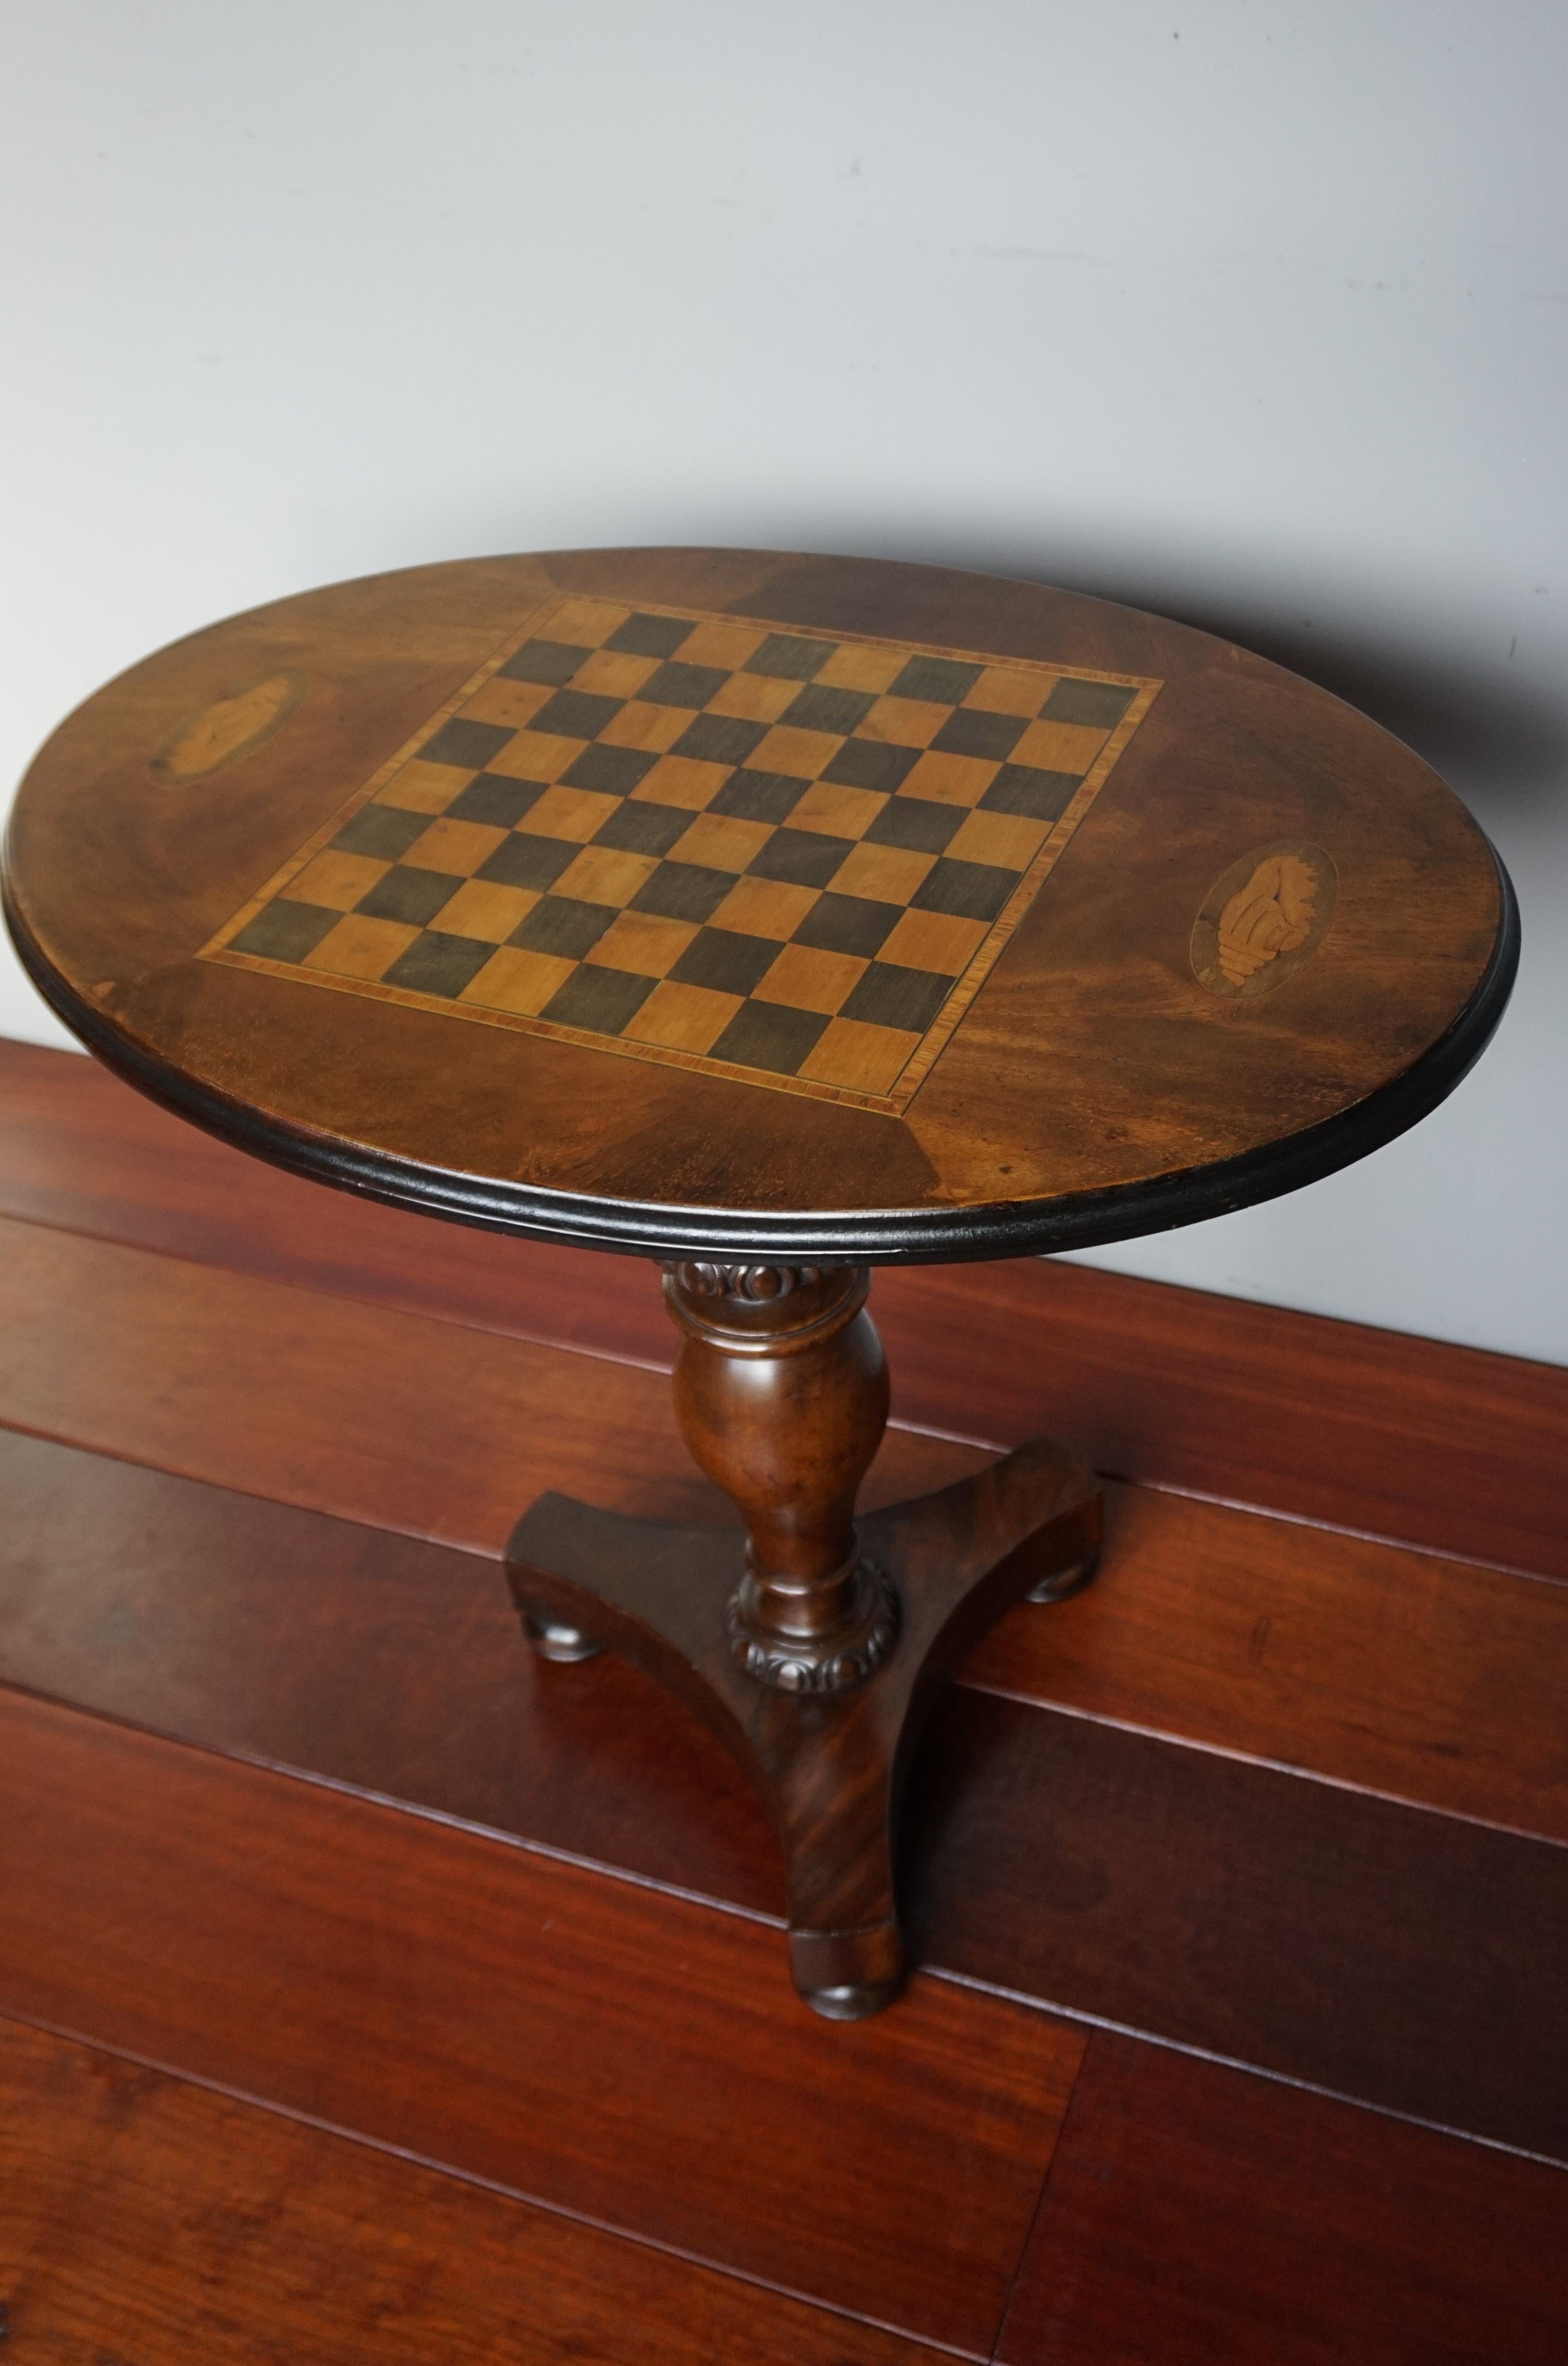 20th Century Antique Nutwood and Satinwood Tilt-Top Chess Table with Nautilus Shell Inlay